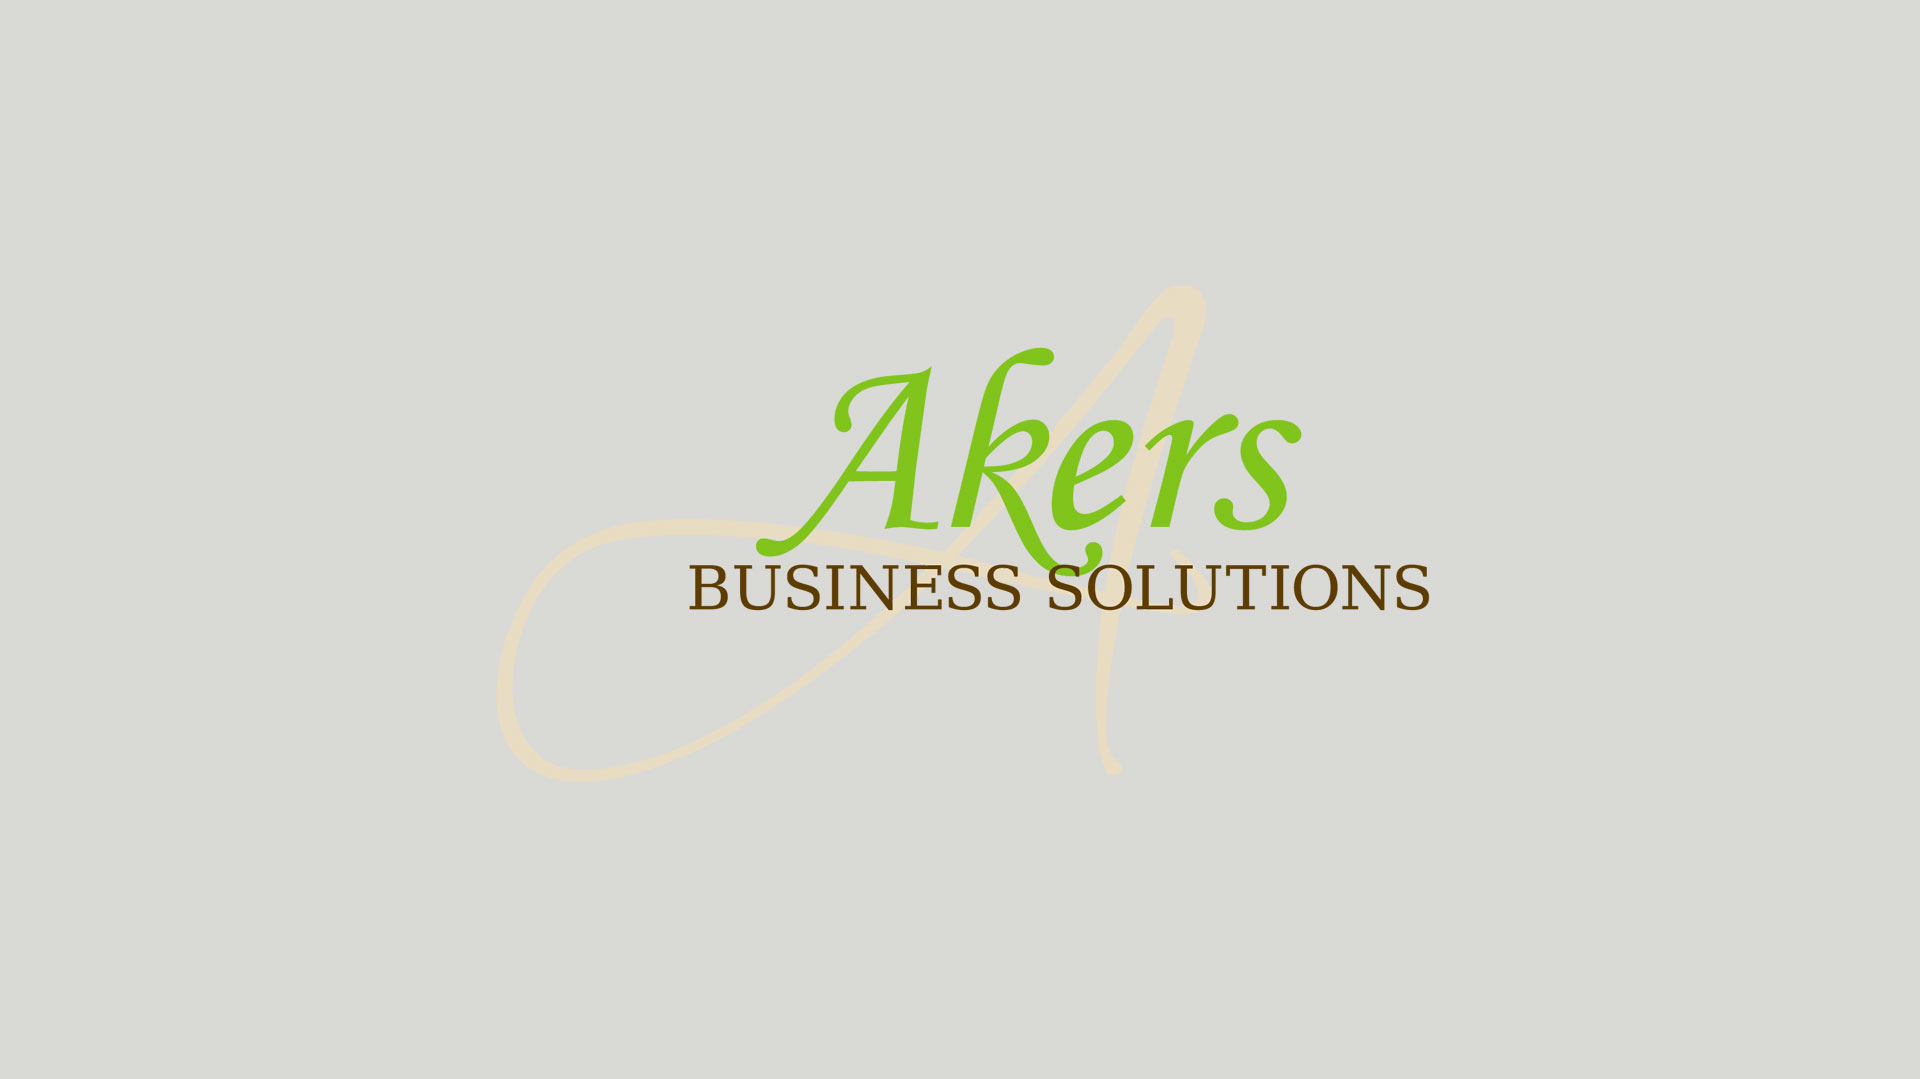 <h1>New Representative: Akers Business Solutions</h1>